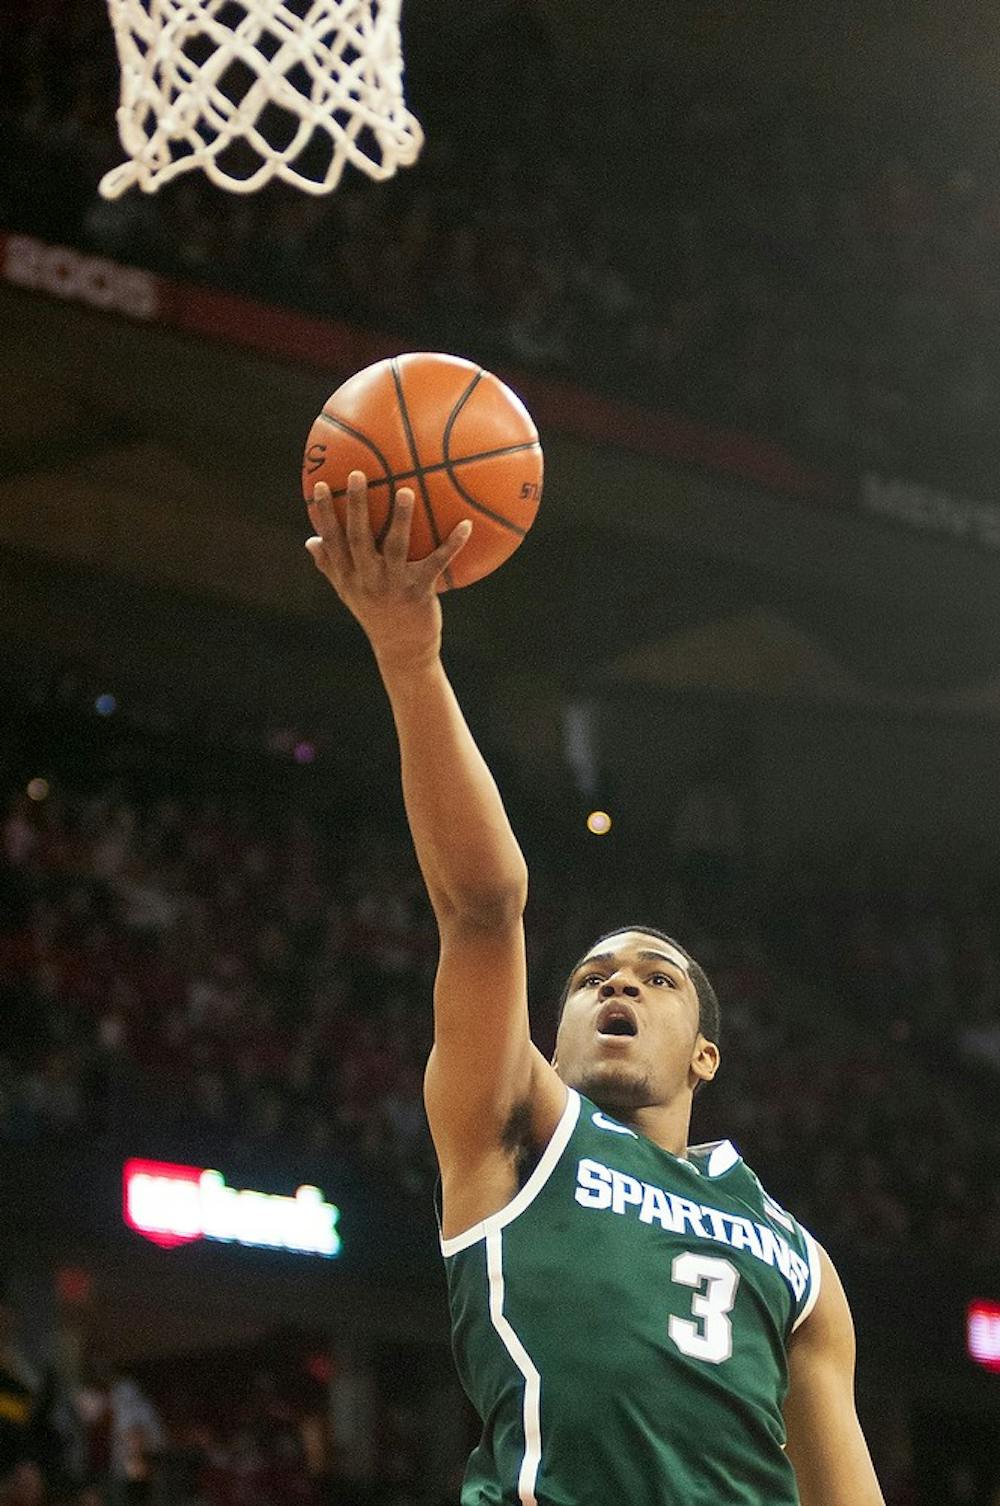 	<p>Freshman guard Alvin Ellis <span class="caps">III</span> goes up for a shot during the game against Wisconsin on Feb. 9, 2014, at Kohl Center in Madison, Wis. The Spartans lost to the Badgers, 60-58. Danyelle Morrow/The State News</p>